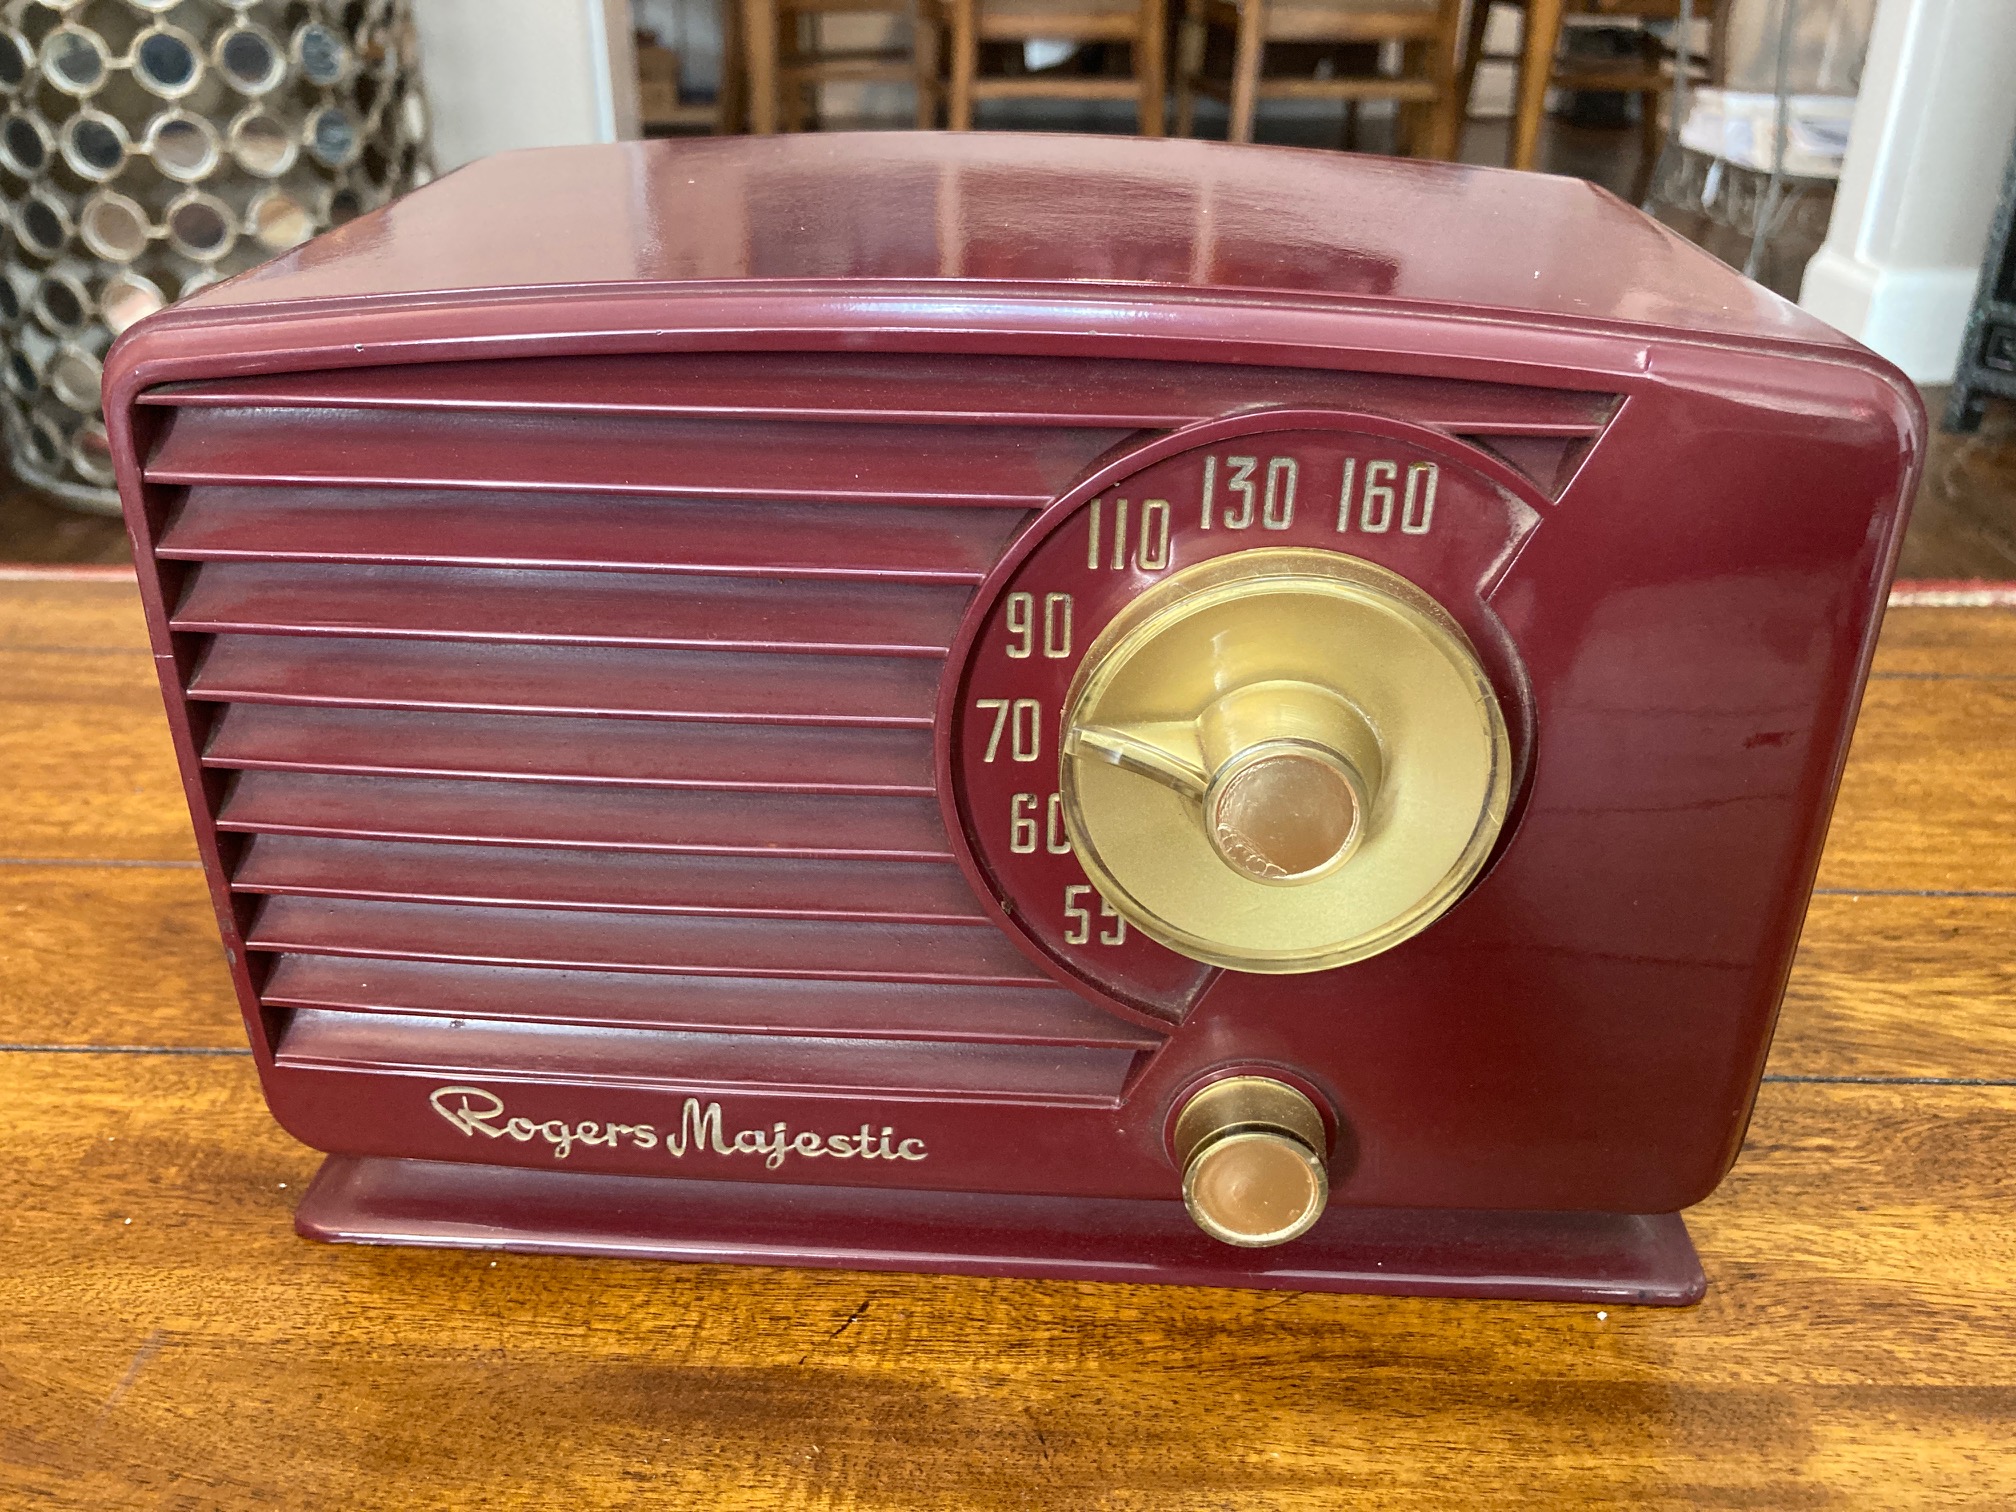 1954 Rogers Majestic R531 Brick Red,1954